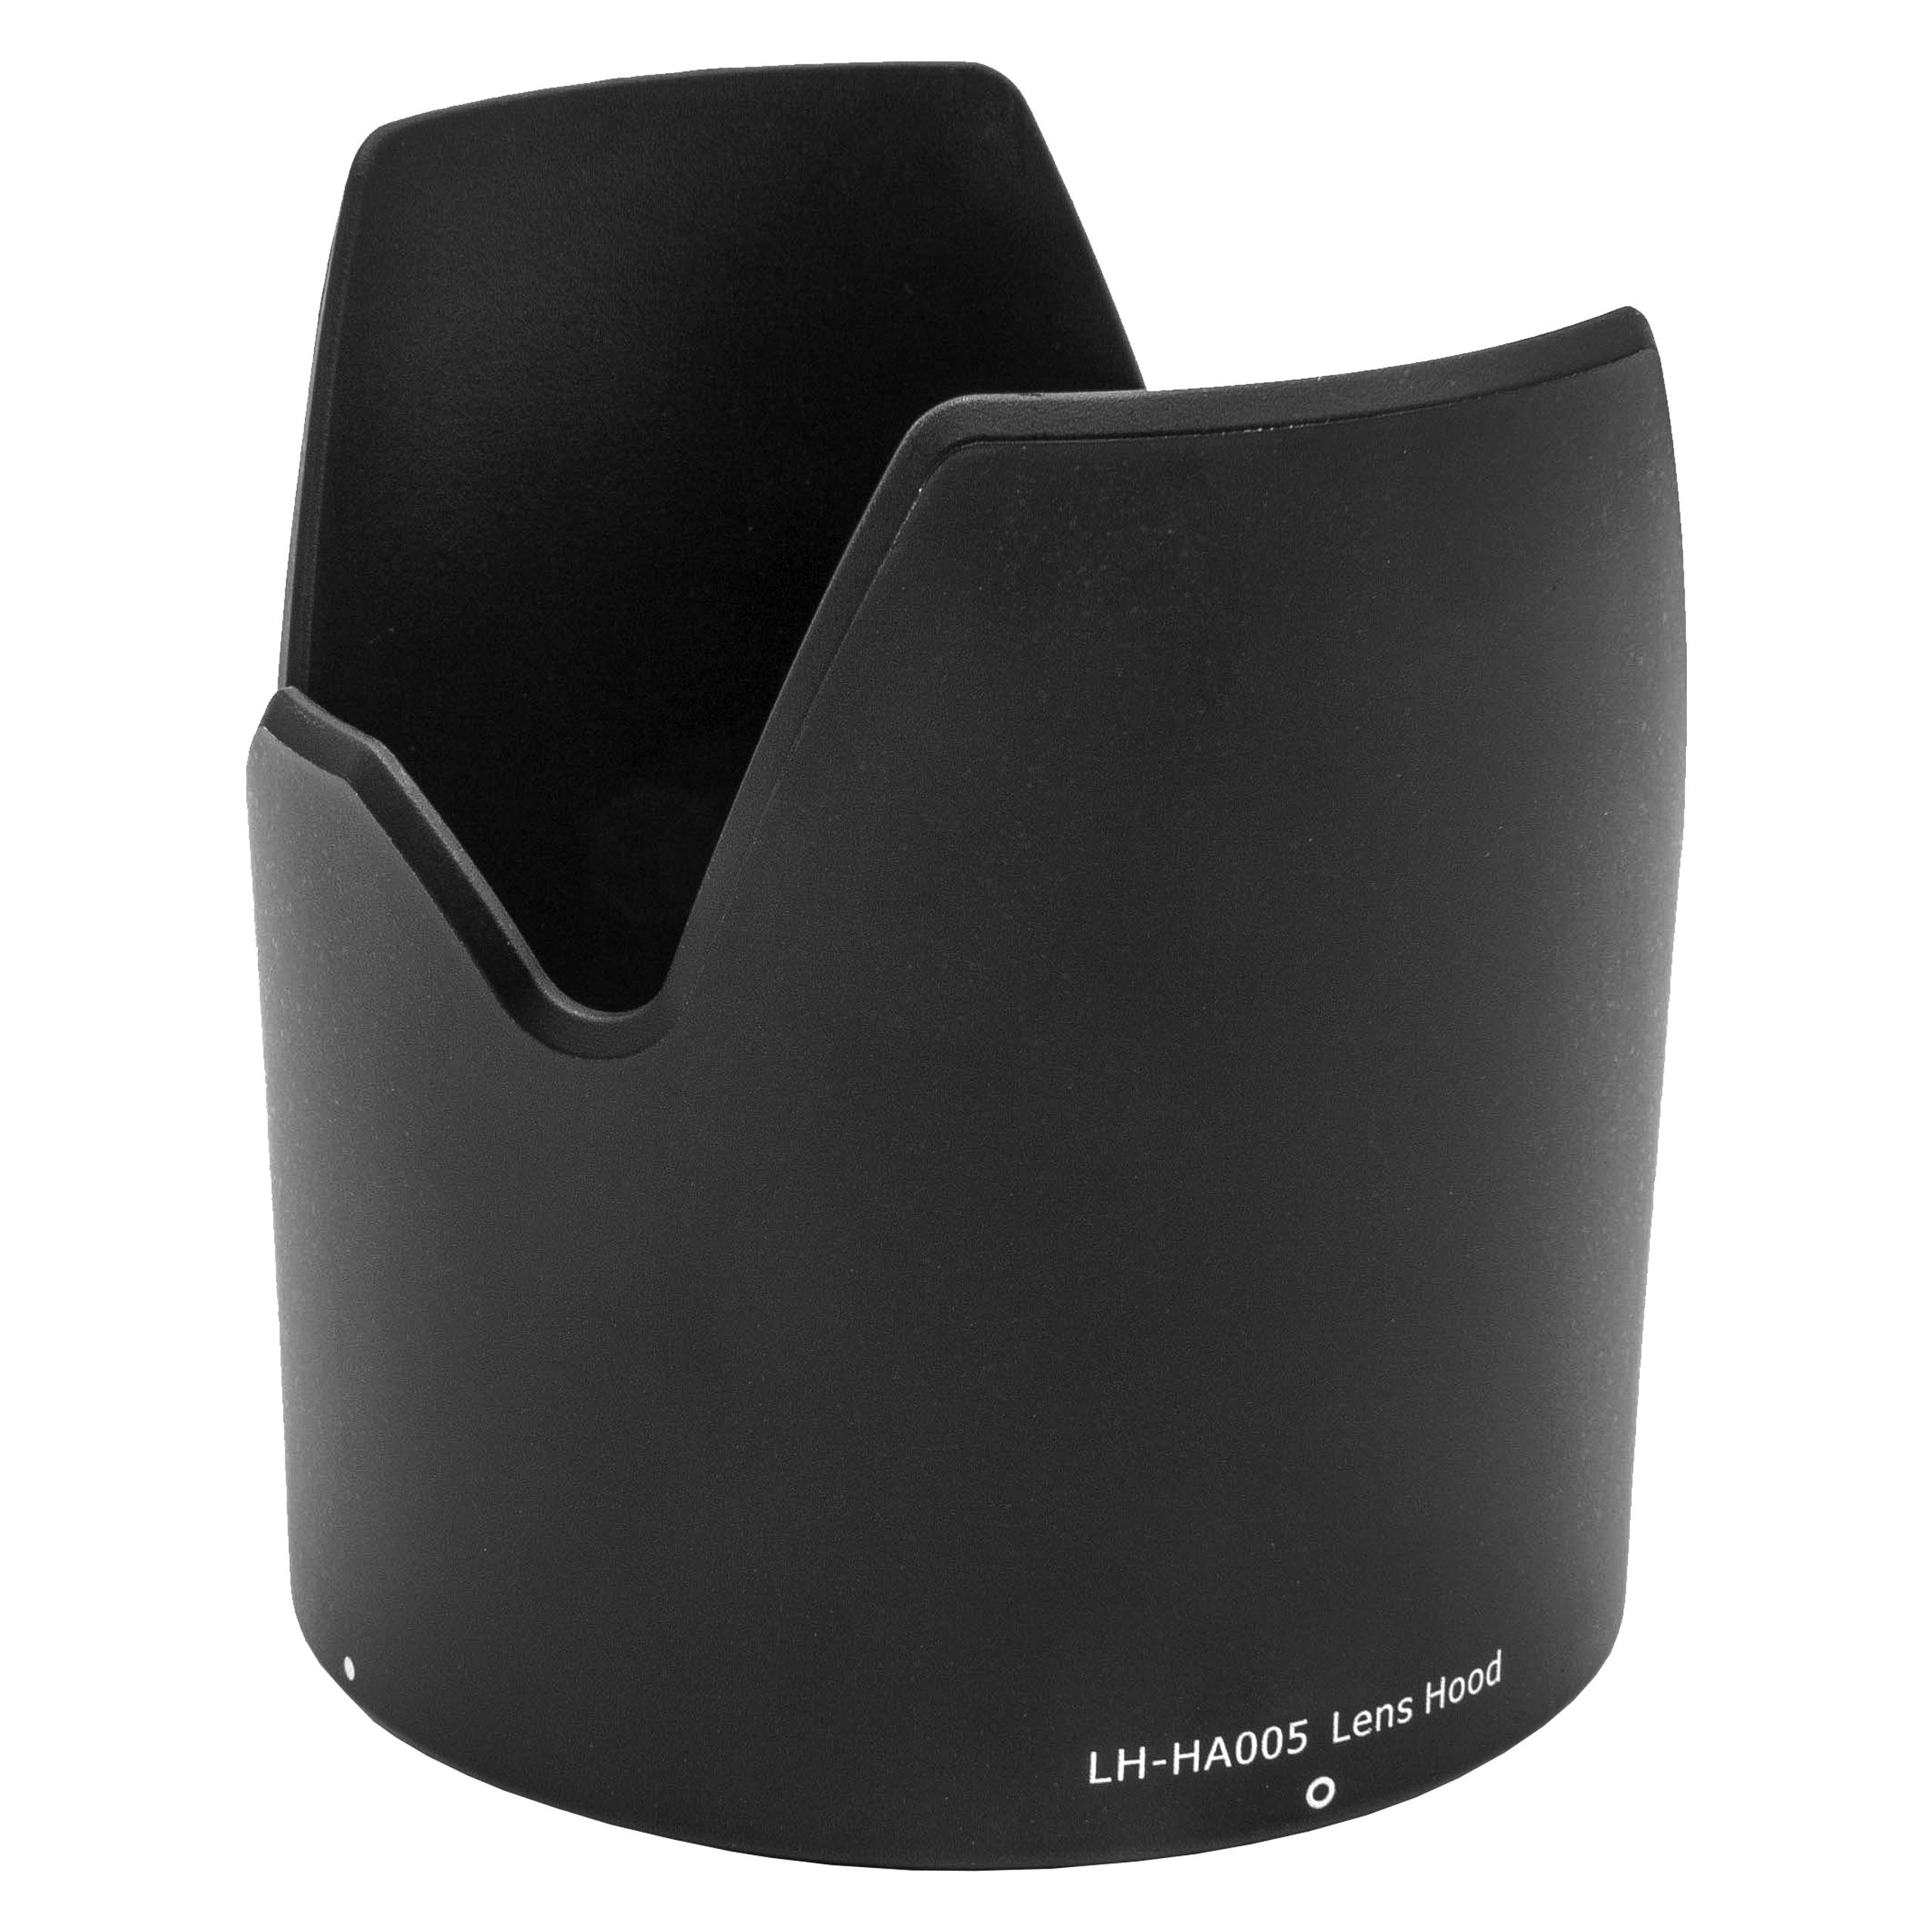 Lens Hood as Replacement for Tamron Lens LH-HA005